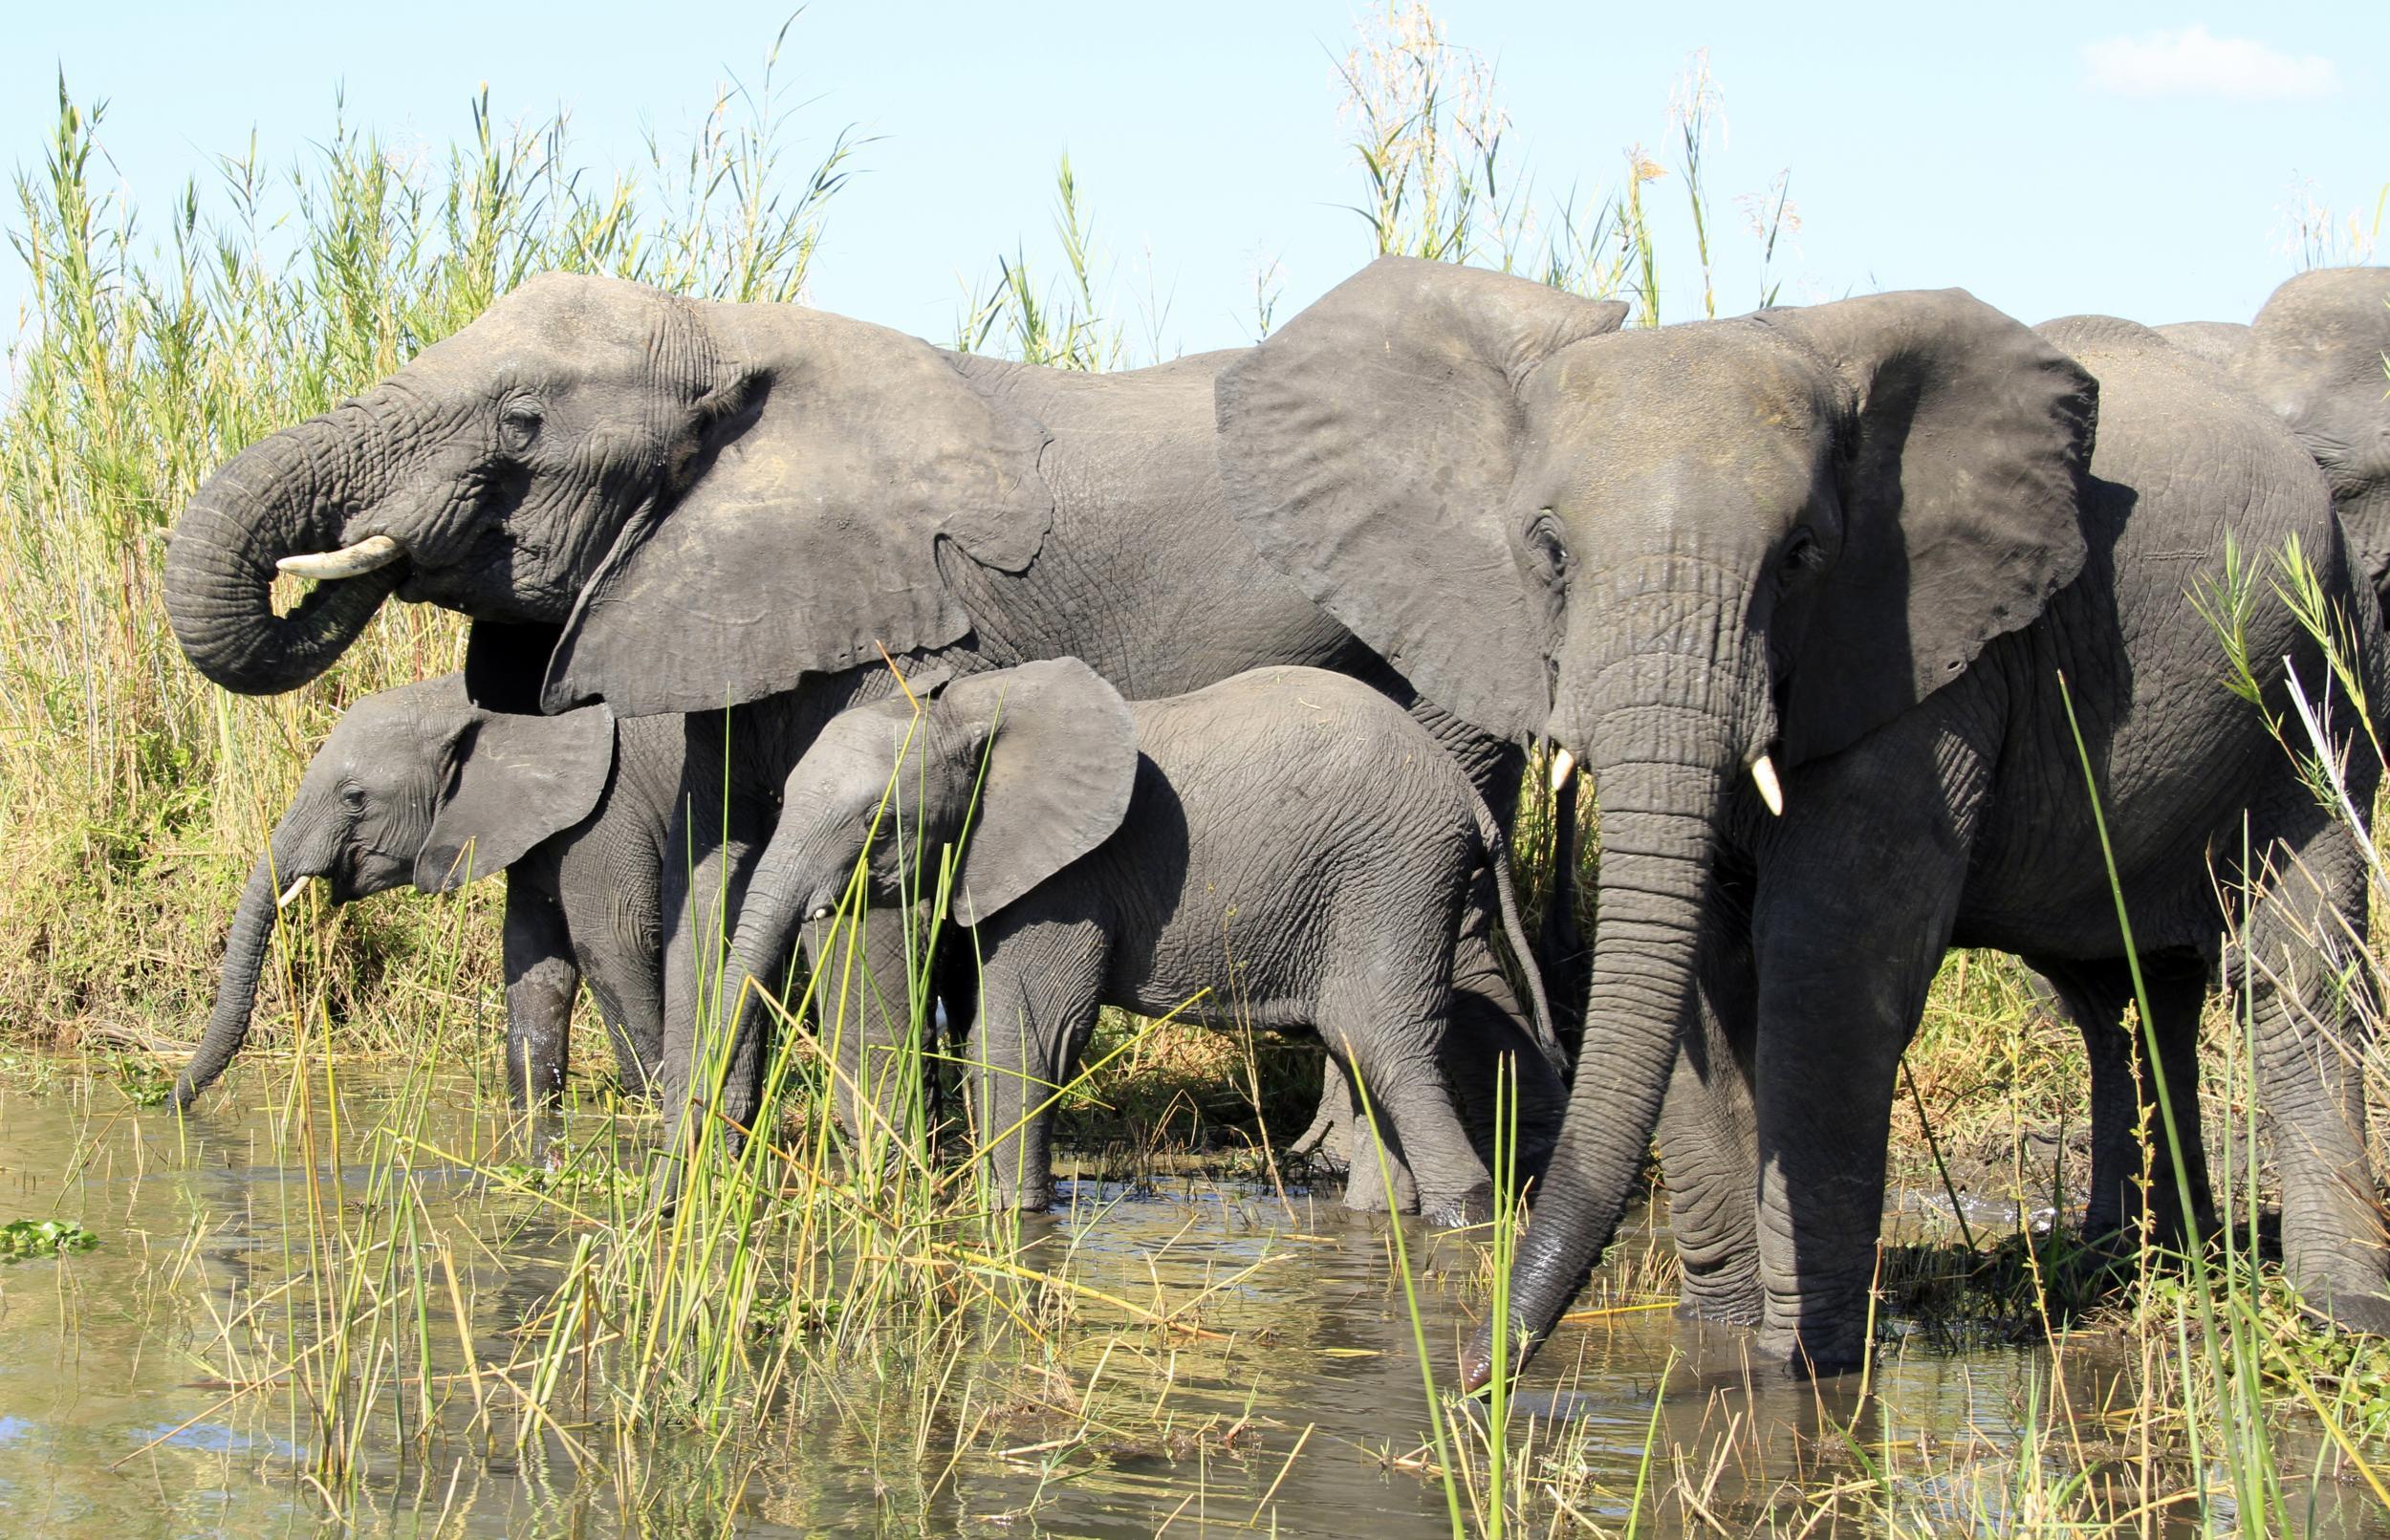 Family life is important to elephants; they communicate in rumbles and mourn their dead